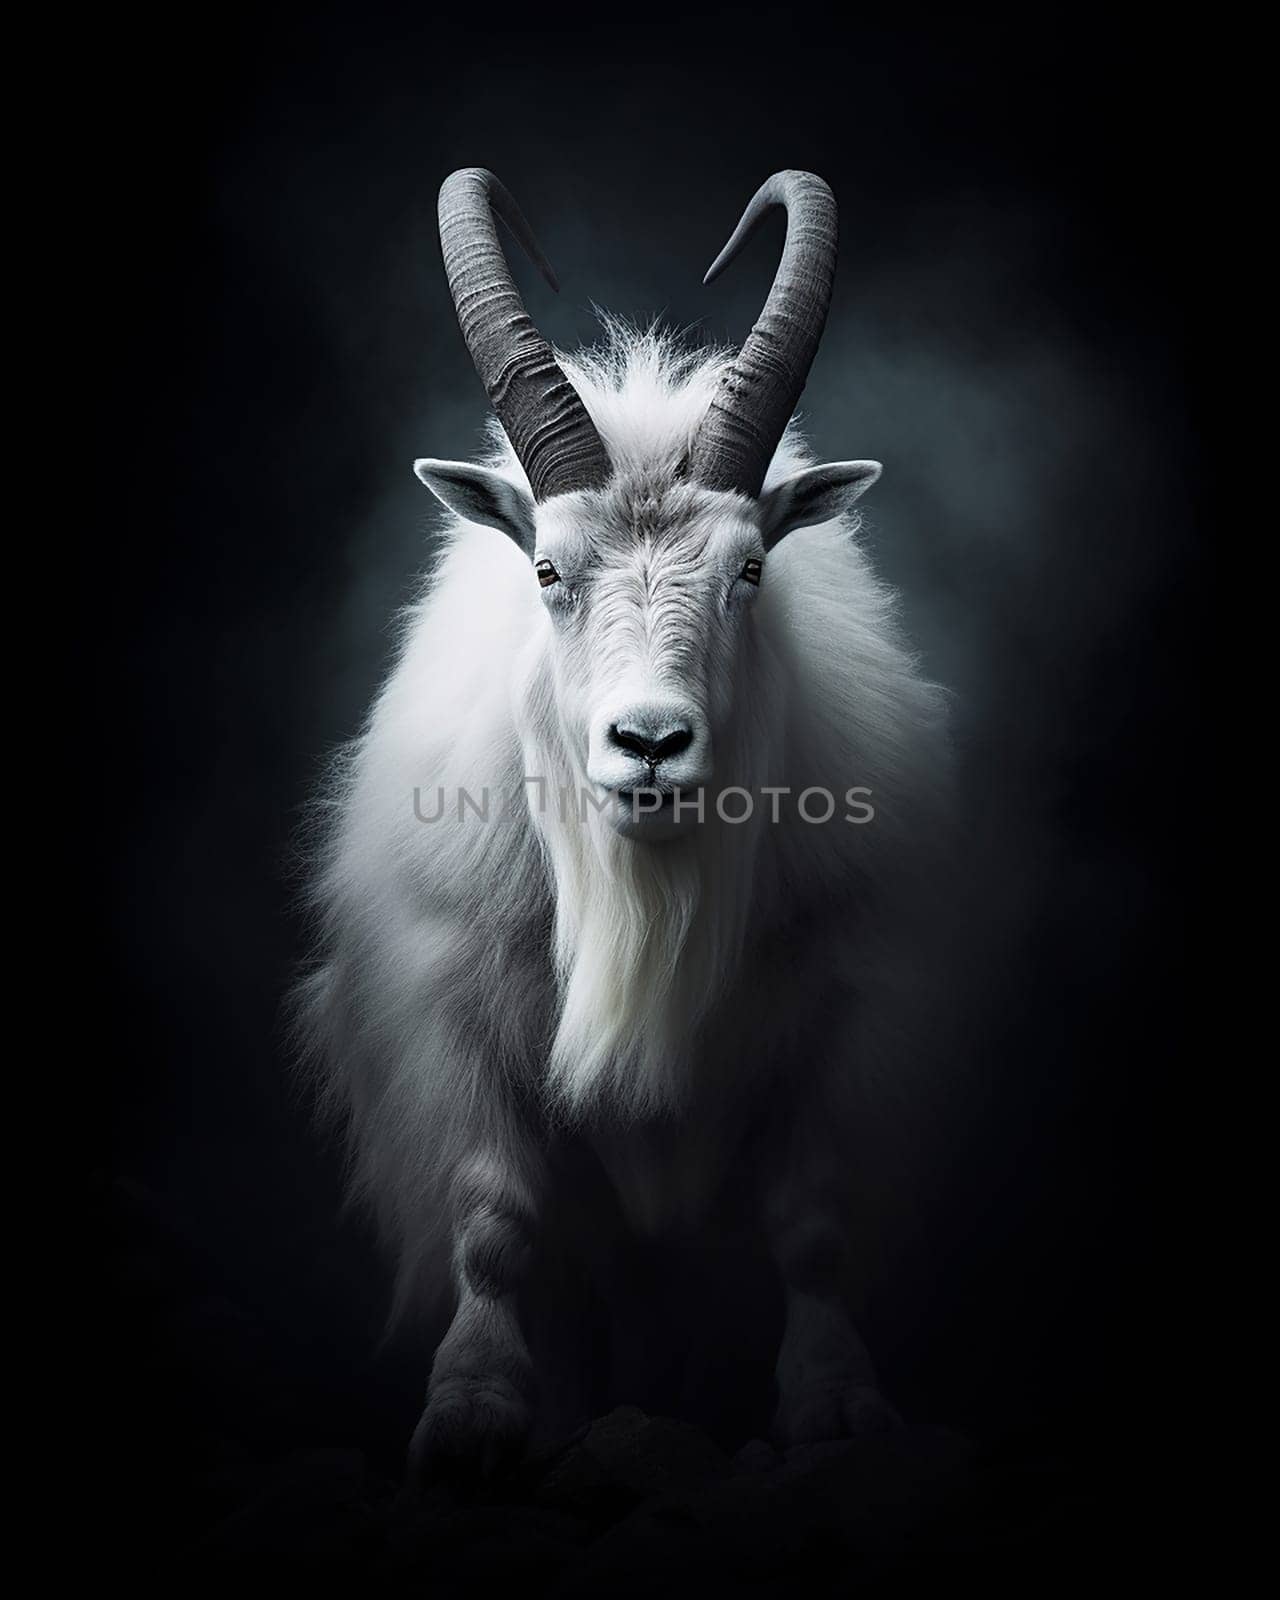 A photo of a goat with big horns by Hype2art